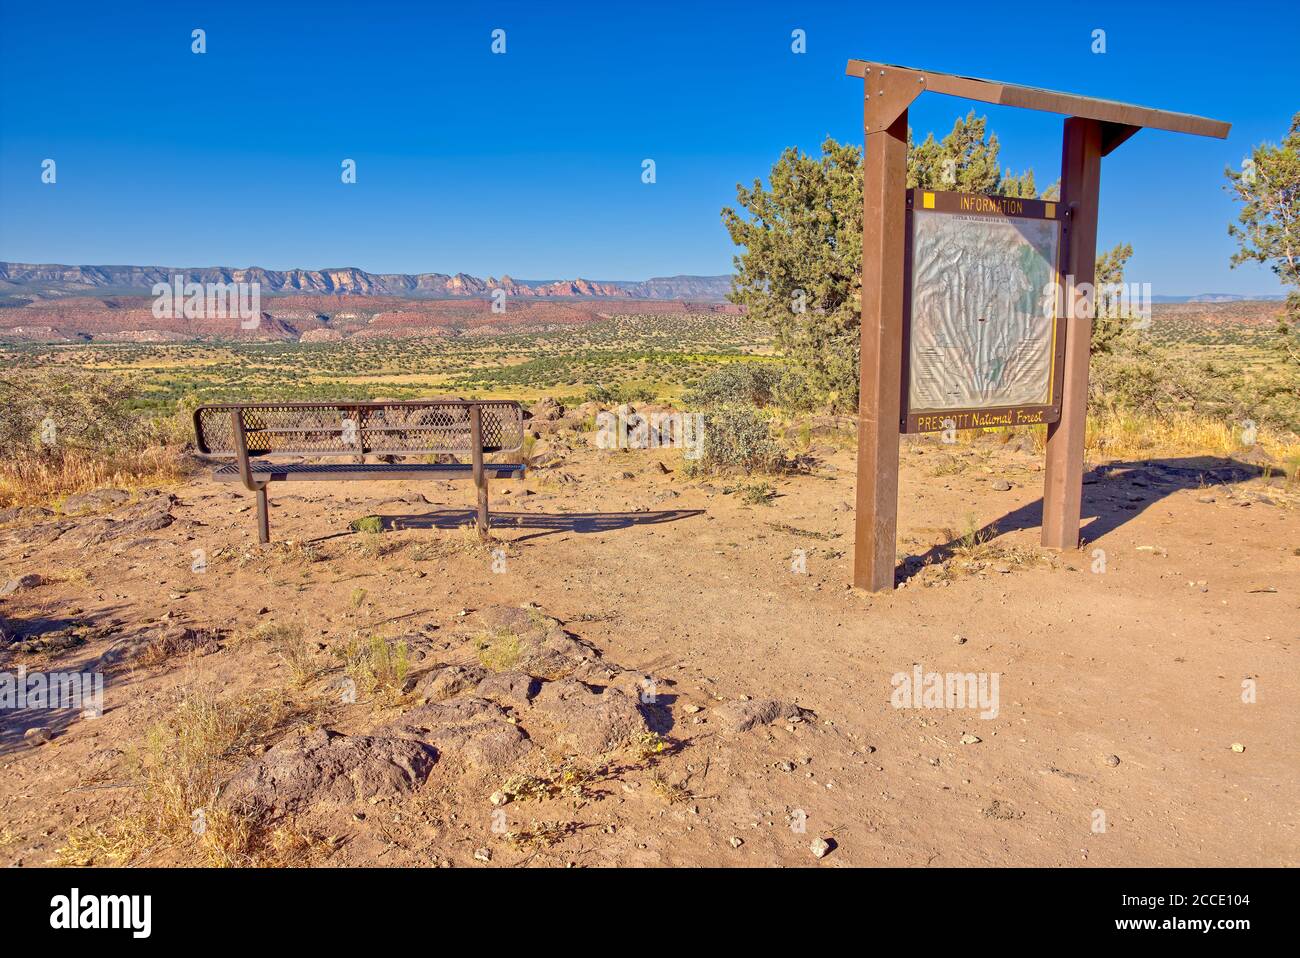 An overlook sitting bench with information sign for the Upper Verde River Watershed near Perkinsville Arizona. The red rocks in the distance is the Sy Stock Photo